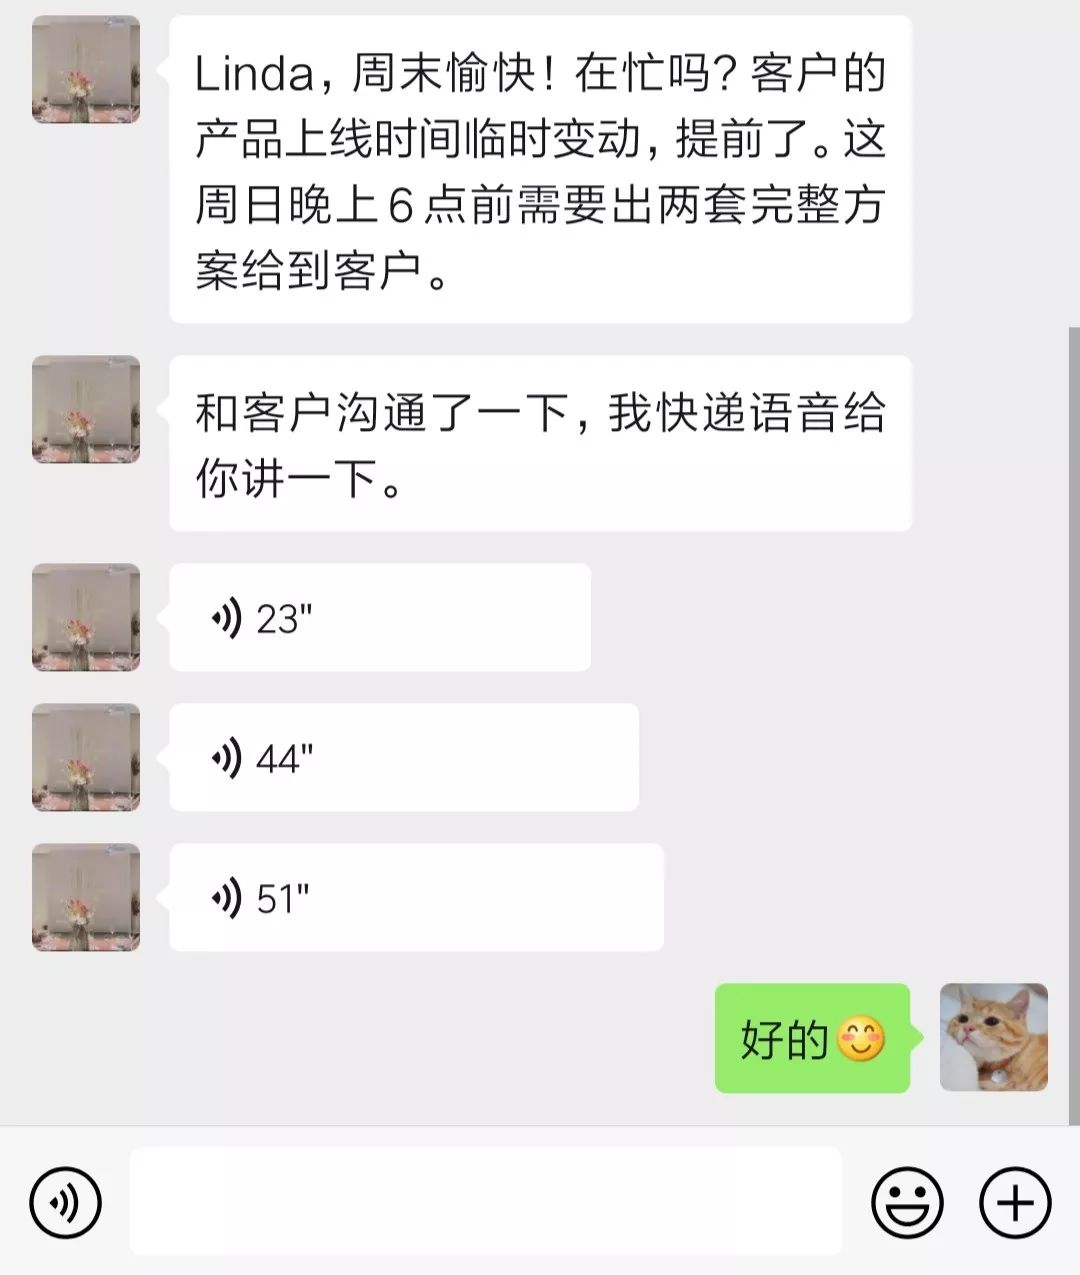 What is your boss thinking about in the 24 minutes without WeChat?